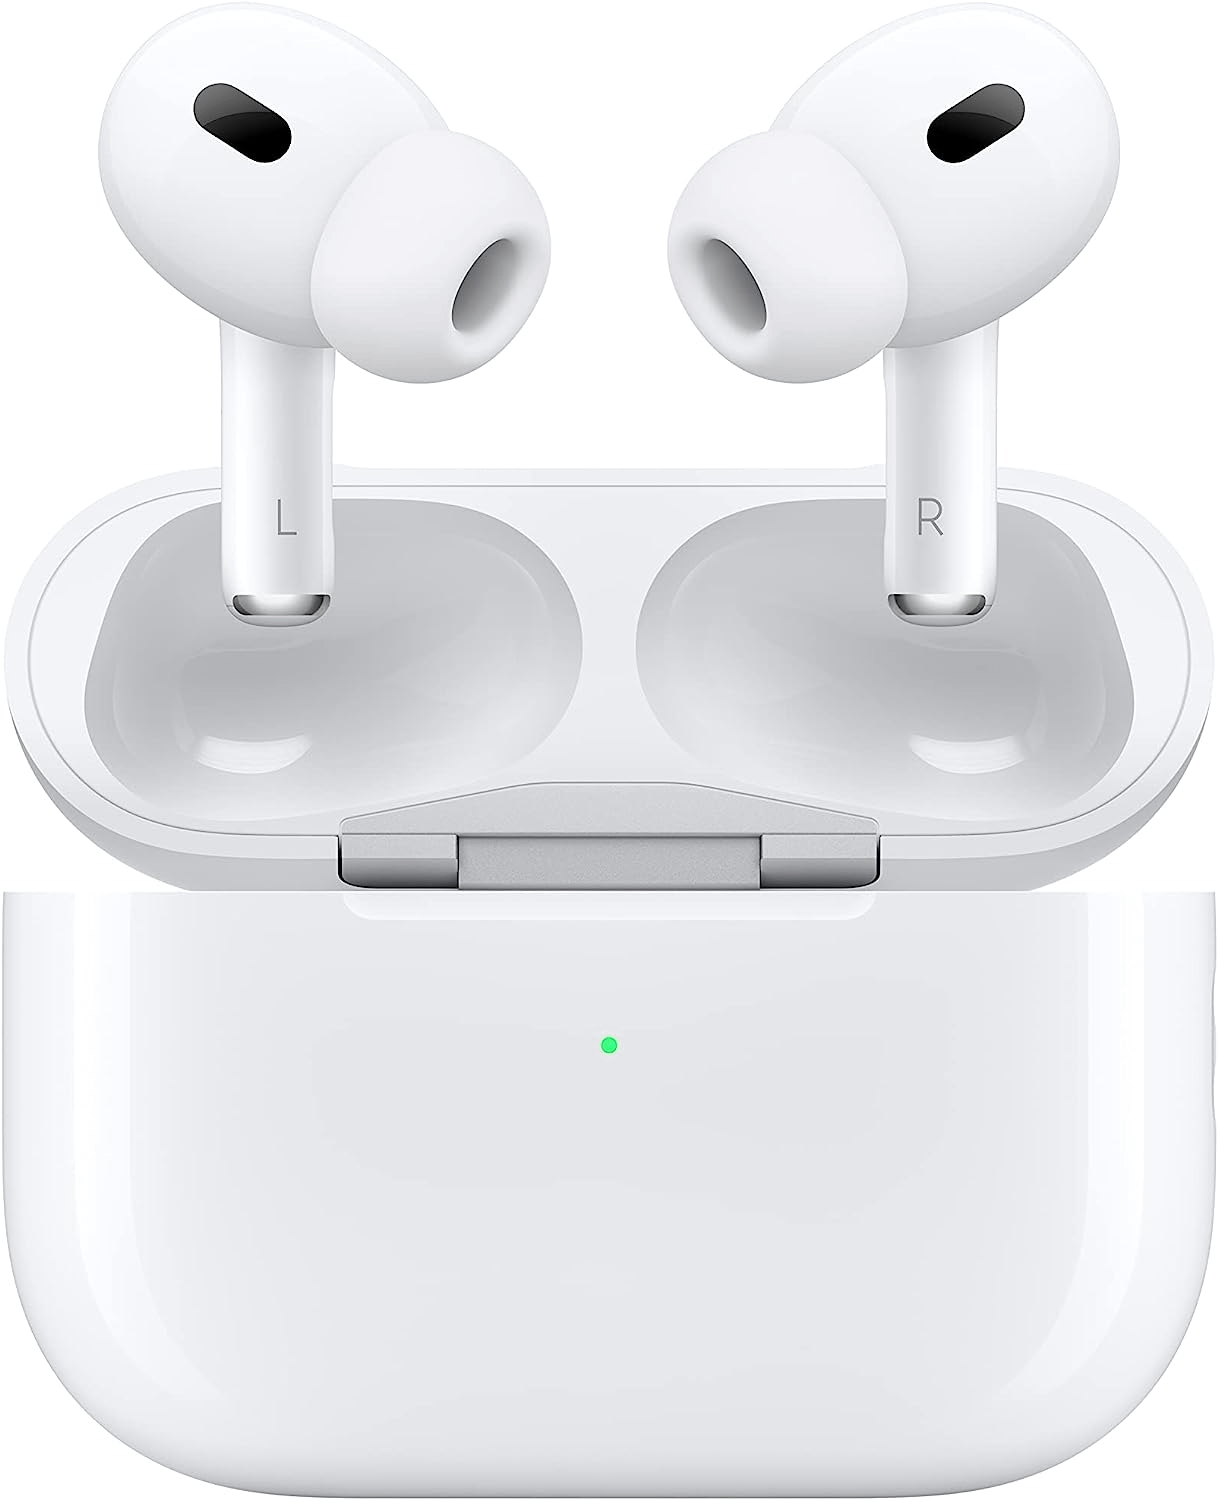 Early Black Friday Earbud Deals - Apple AirPods Pro (2nd Generation)
